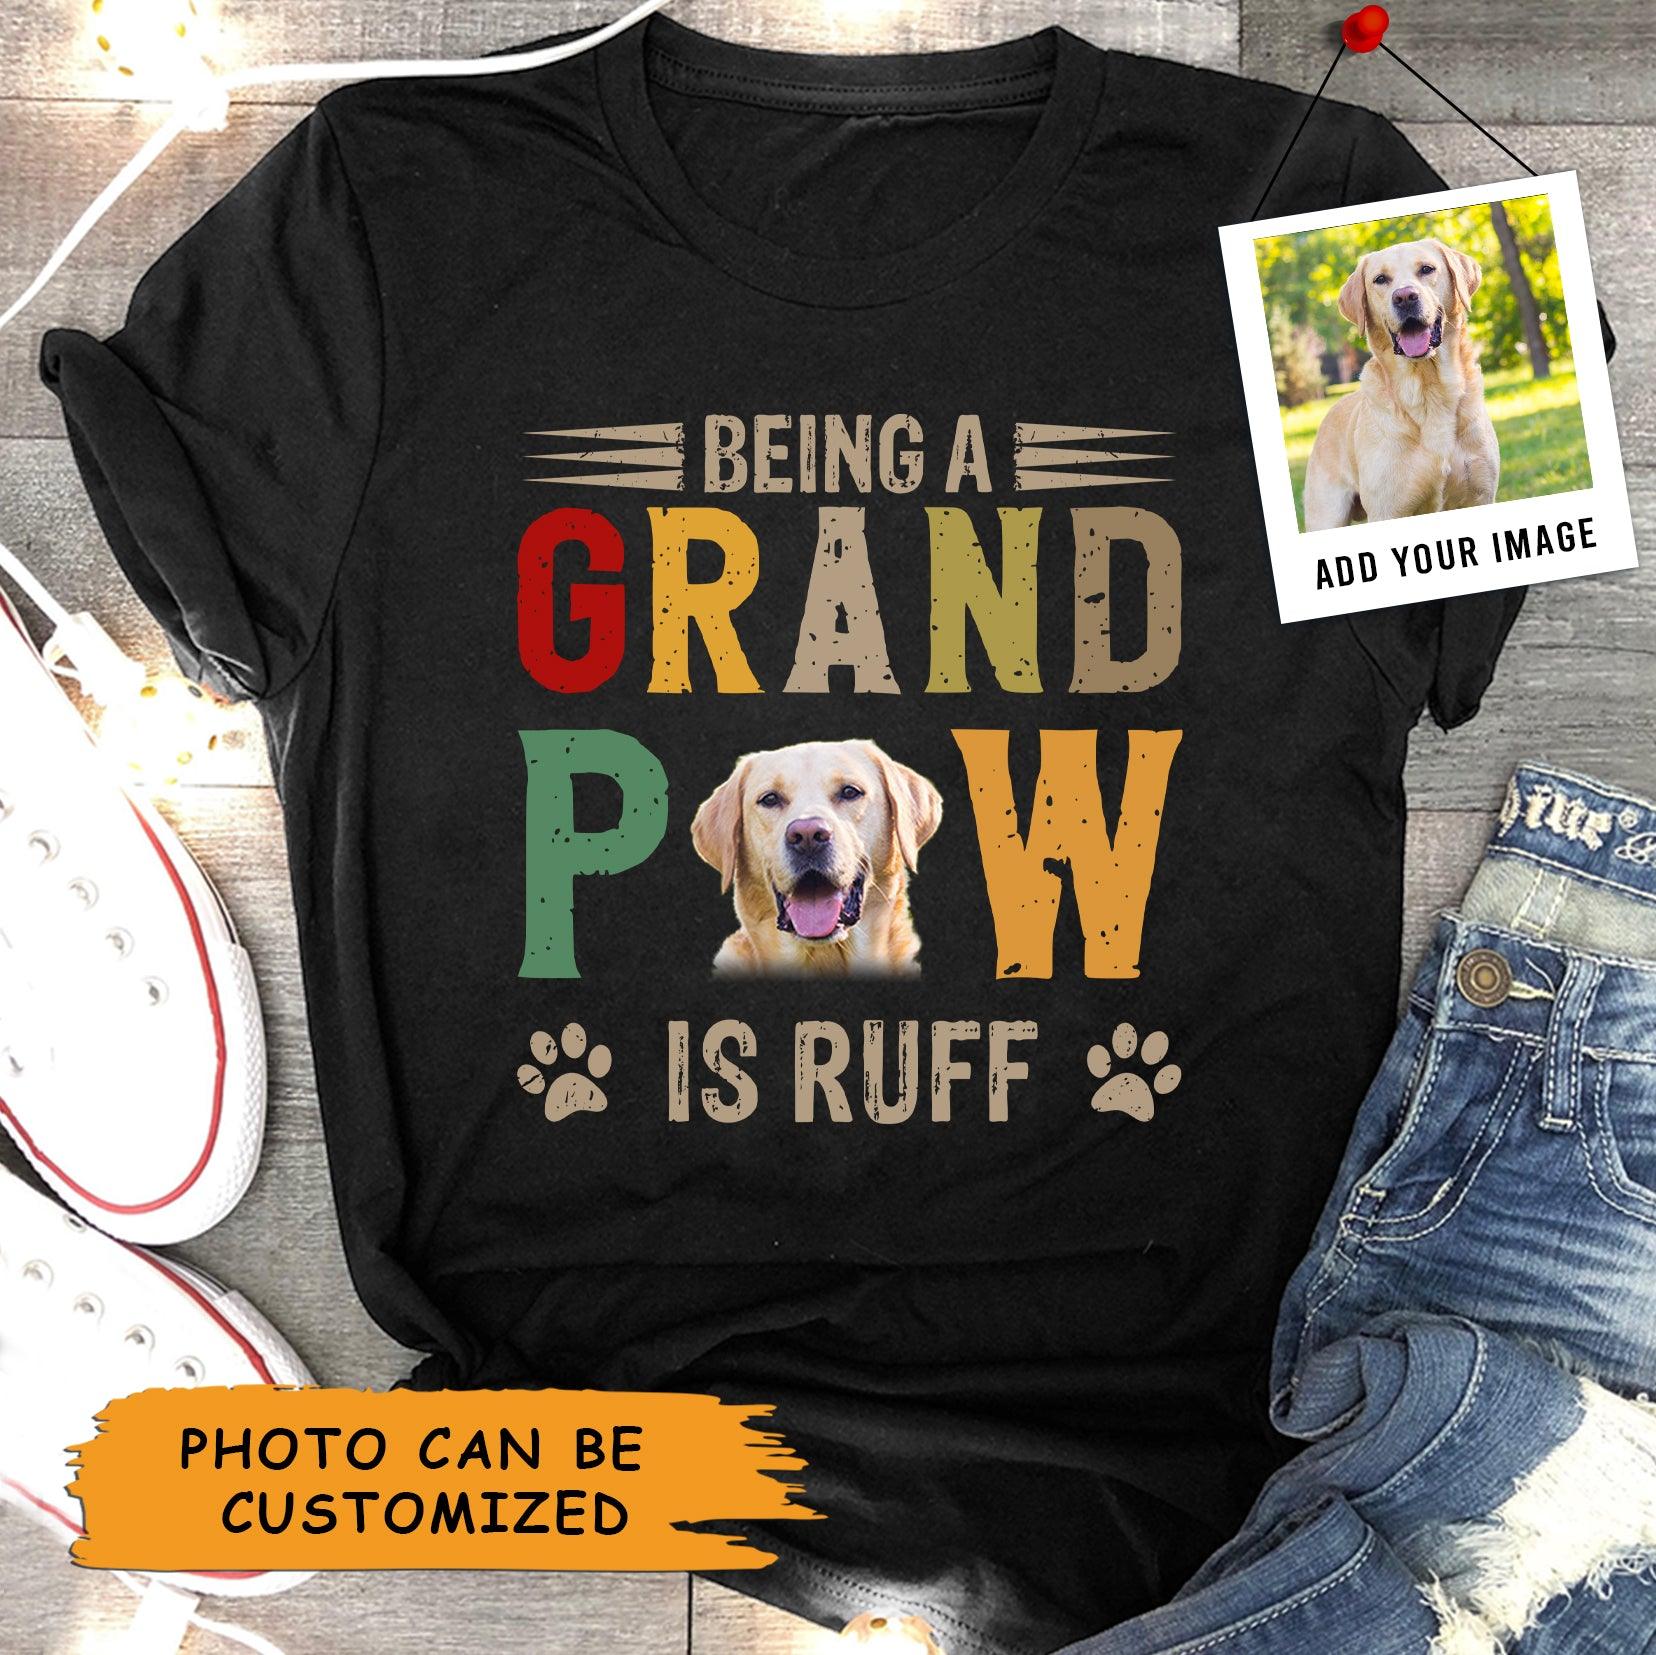 Labrador Dog Unisex T Shirt Custom - Customize Photo Being A Grand Paw Is Ruff Personalized Unisex T Shirt - Gift For Dog Lovers, Friend, Family - Amzanimalsgift